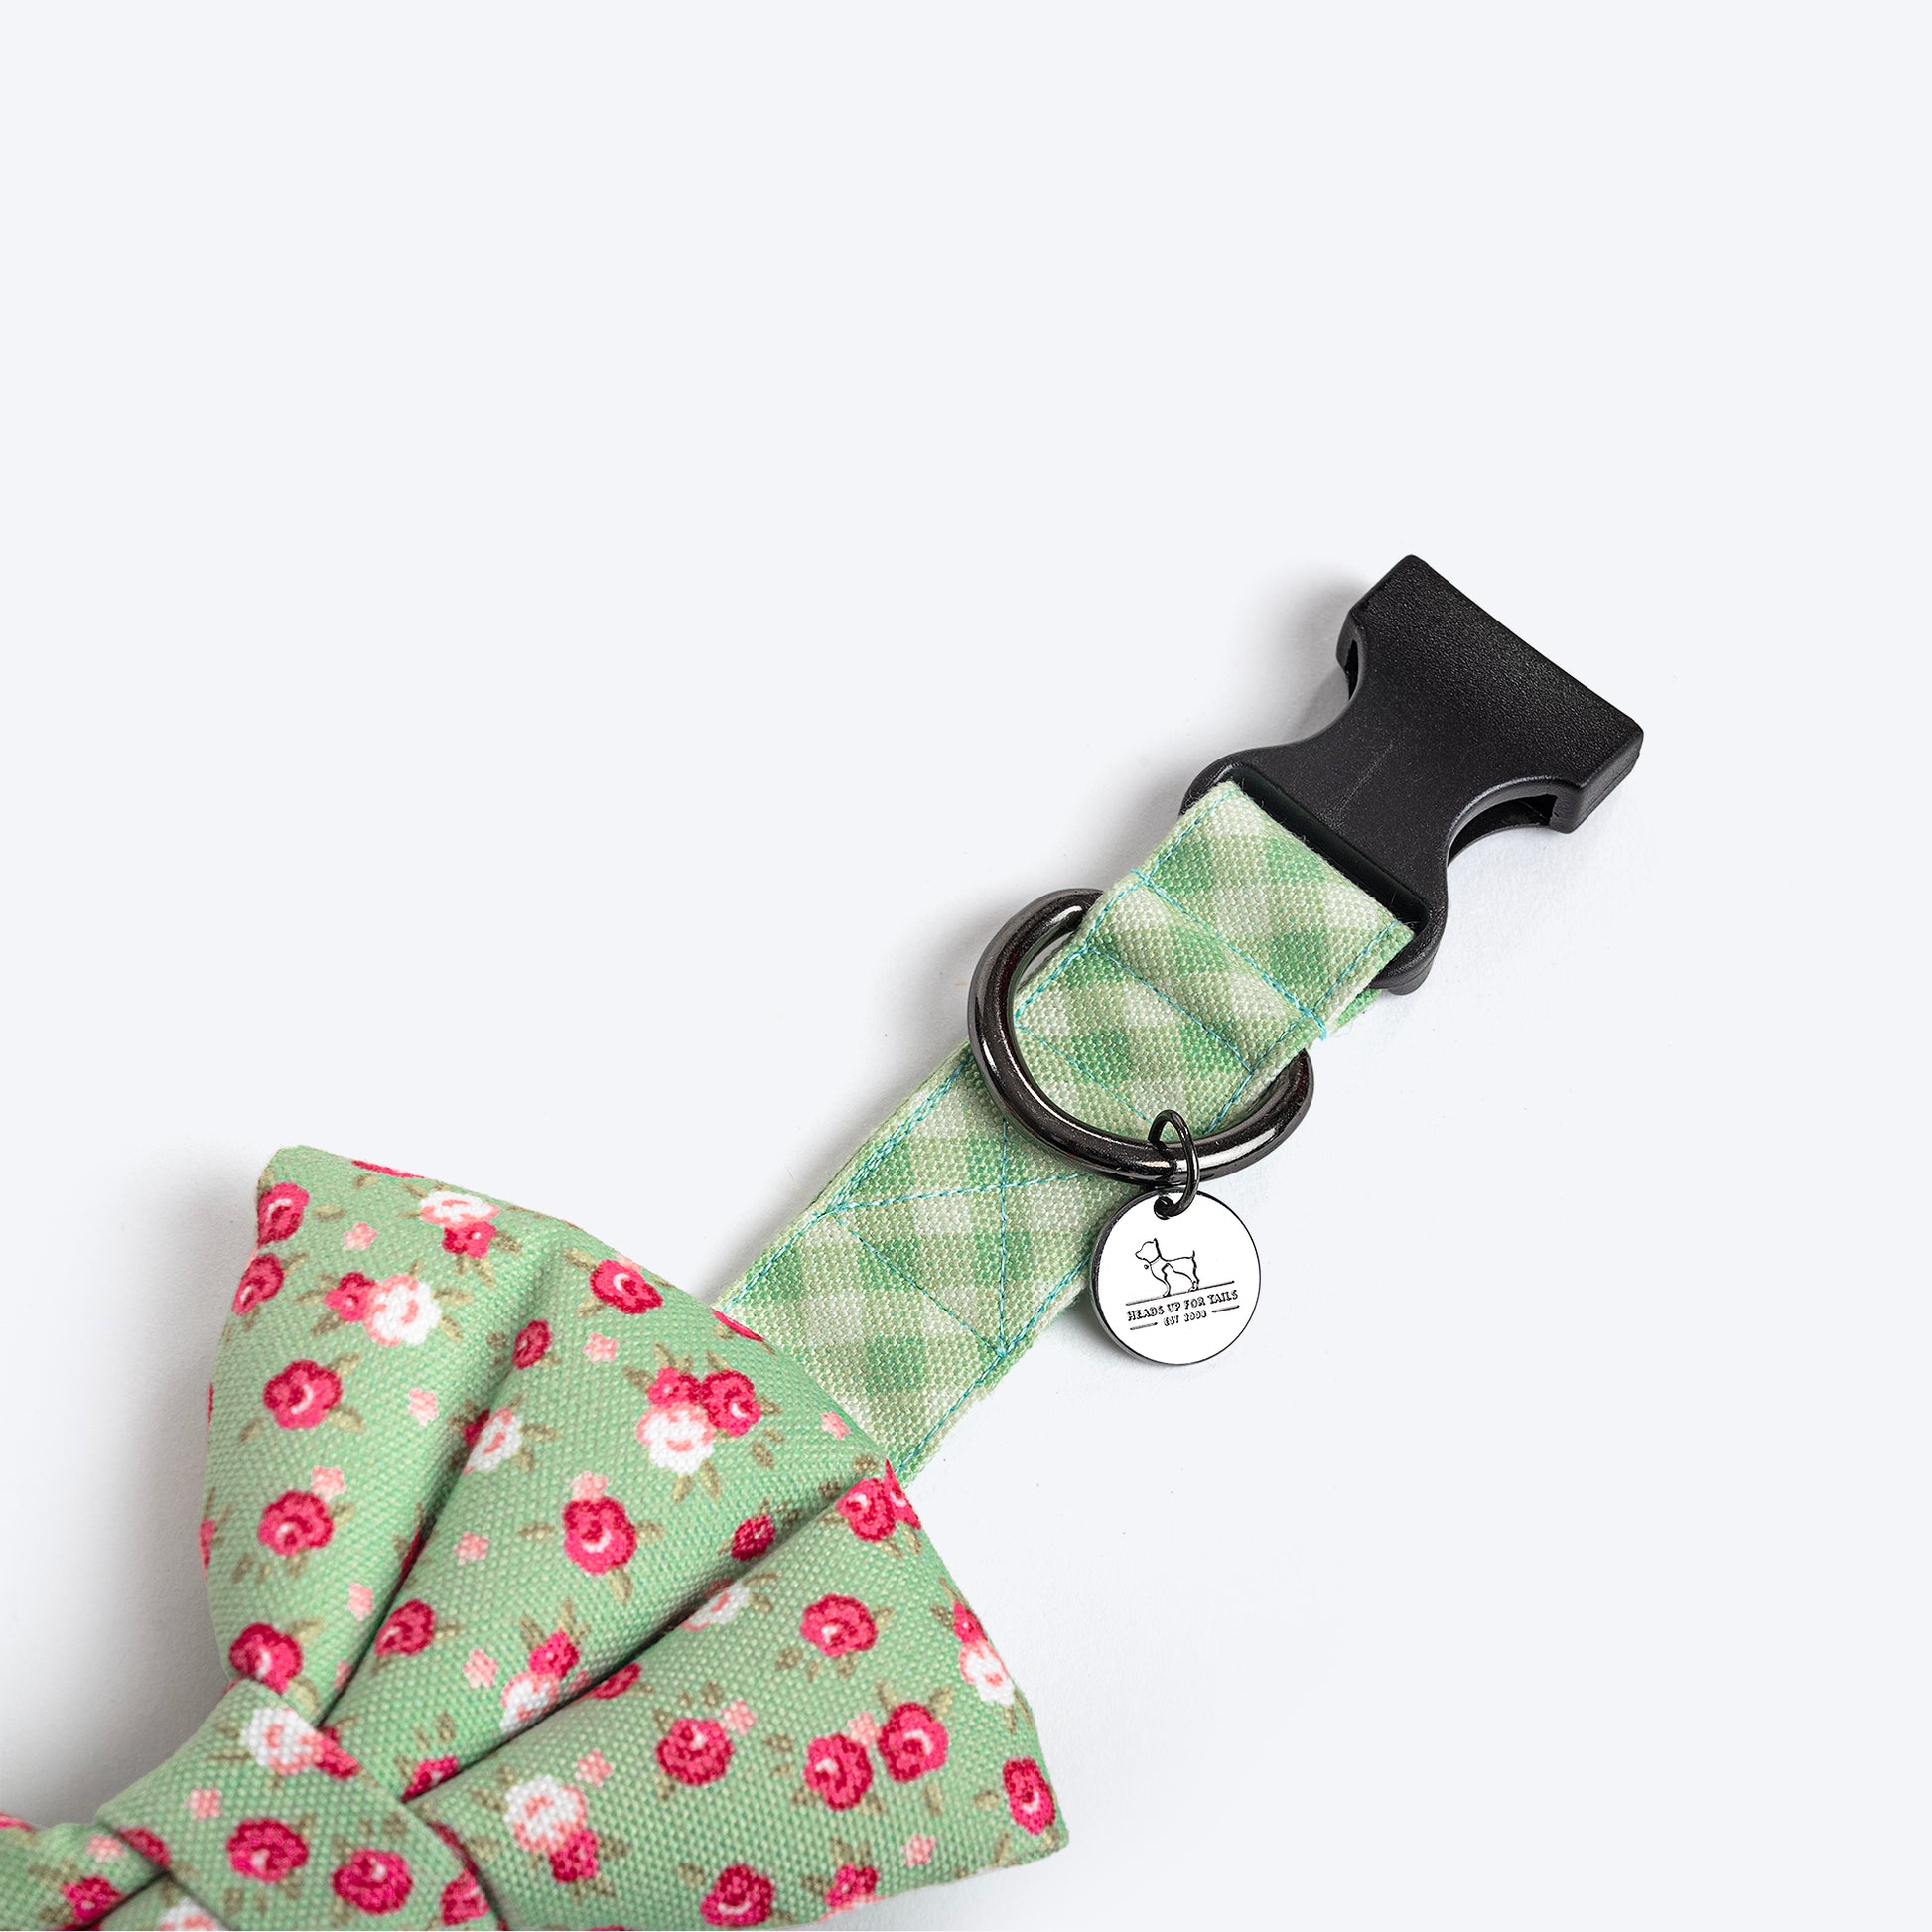 HUFT Pastel Petals Collar For Dogs With Free Bow Tie - Green - Heads Up For Tails